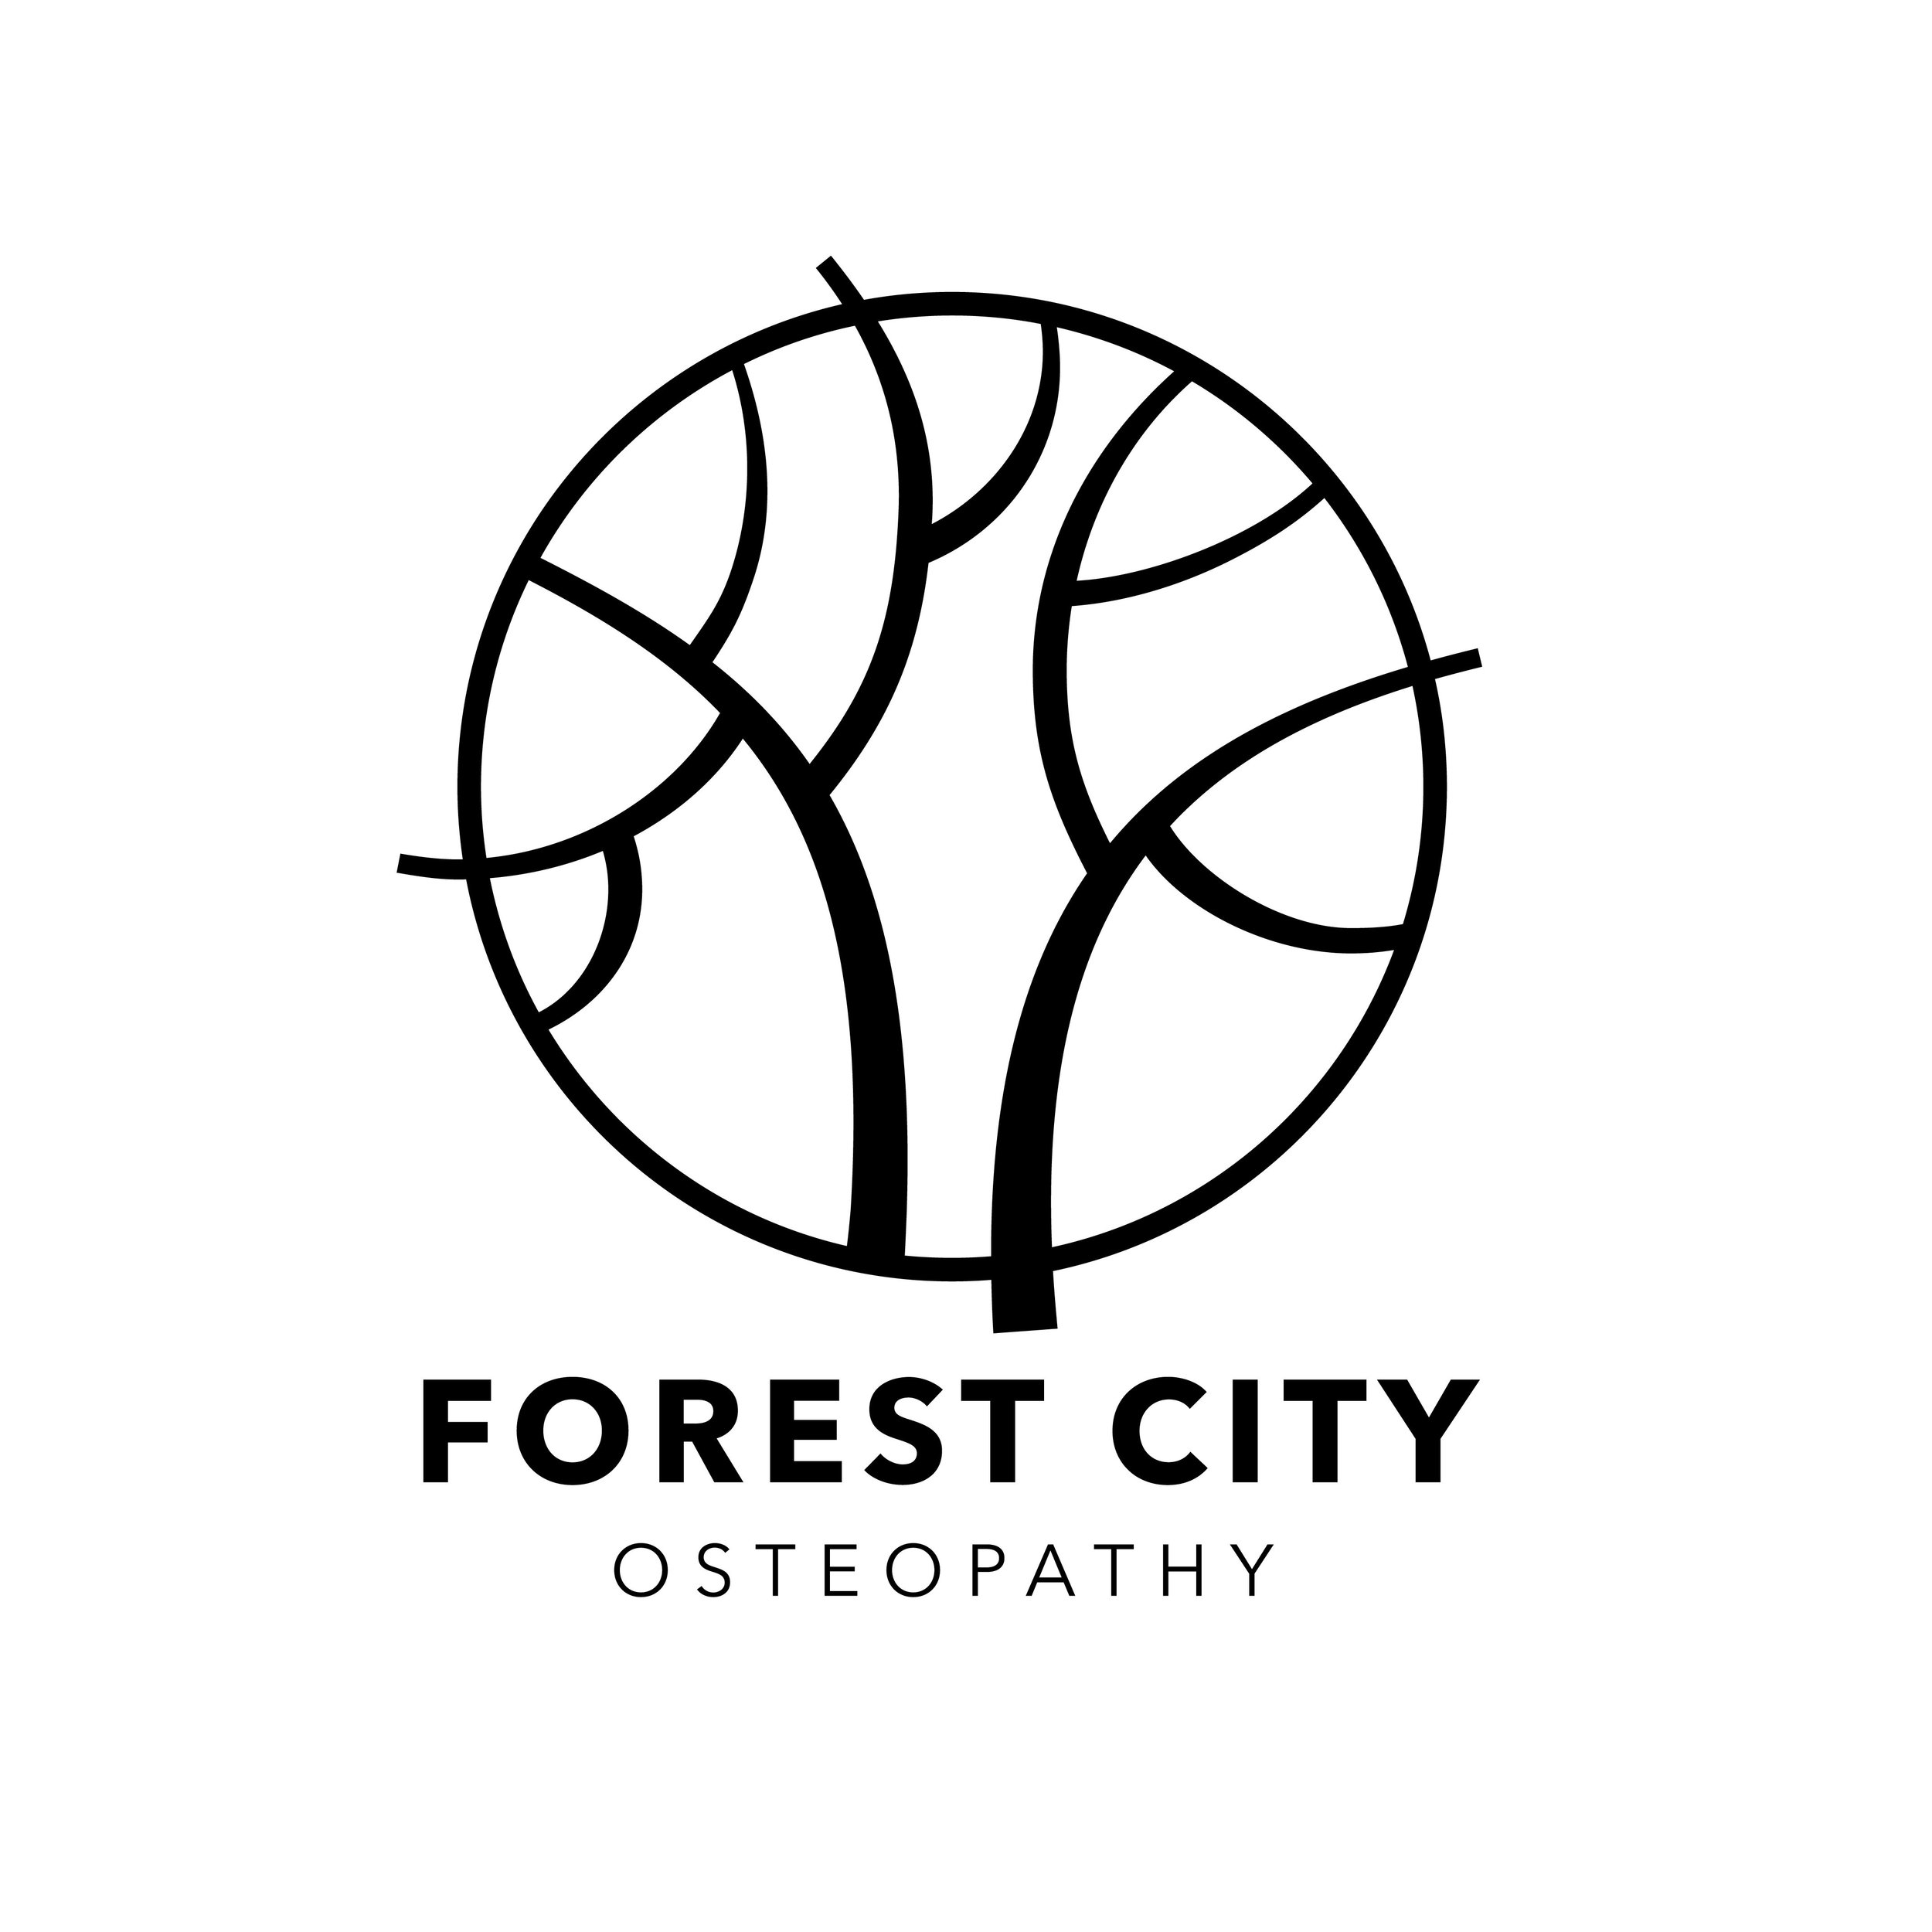 Forest City Osteopathy